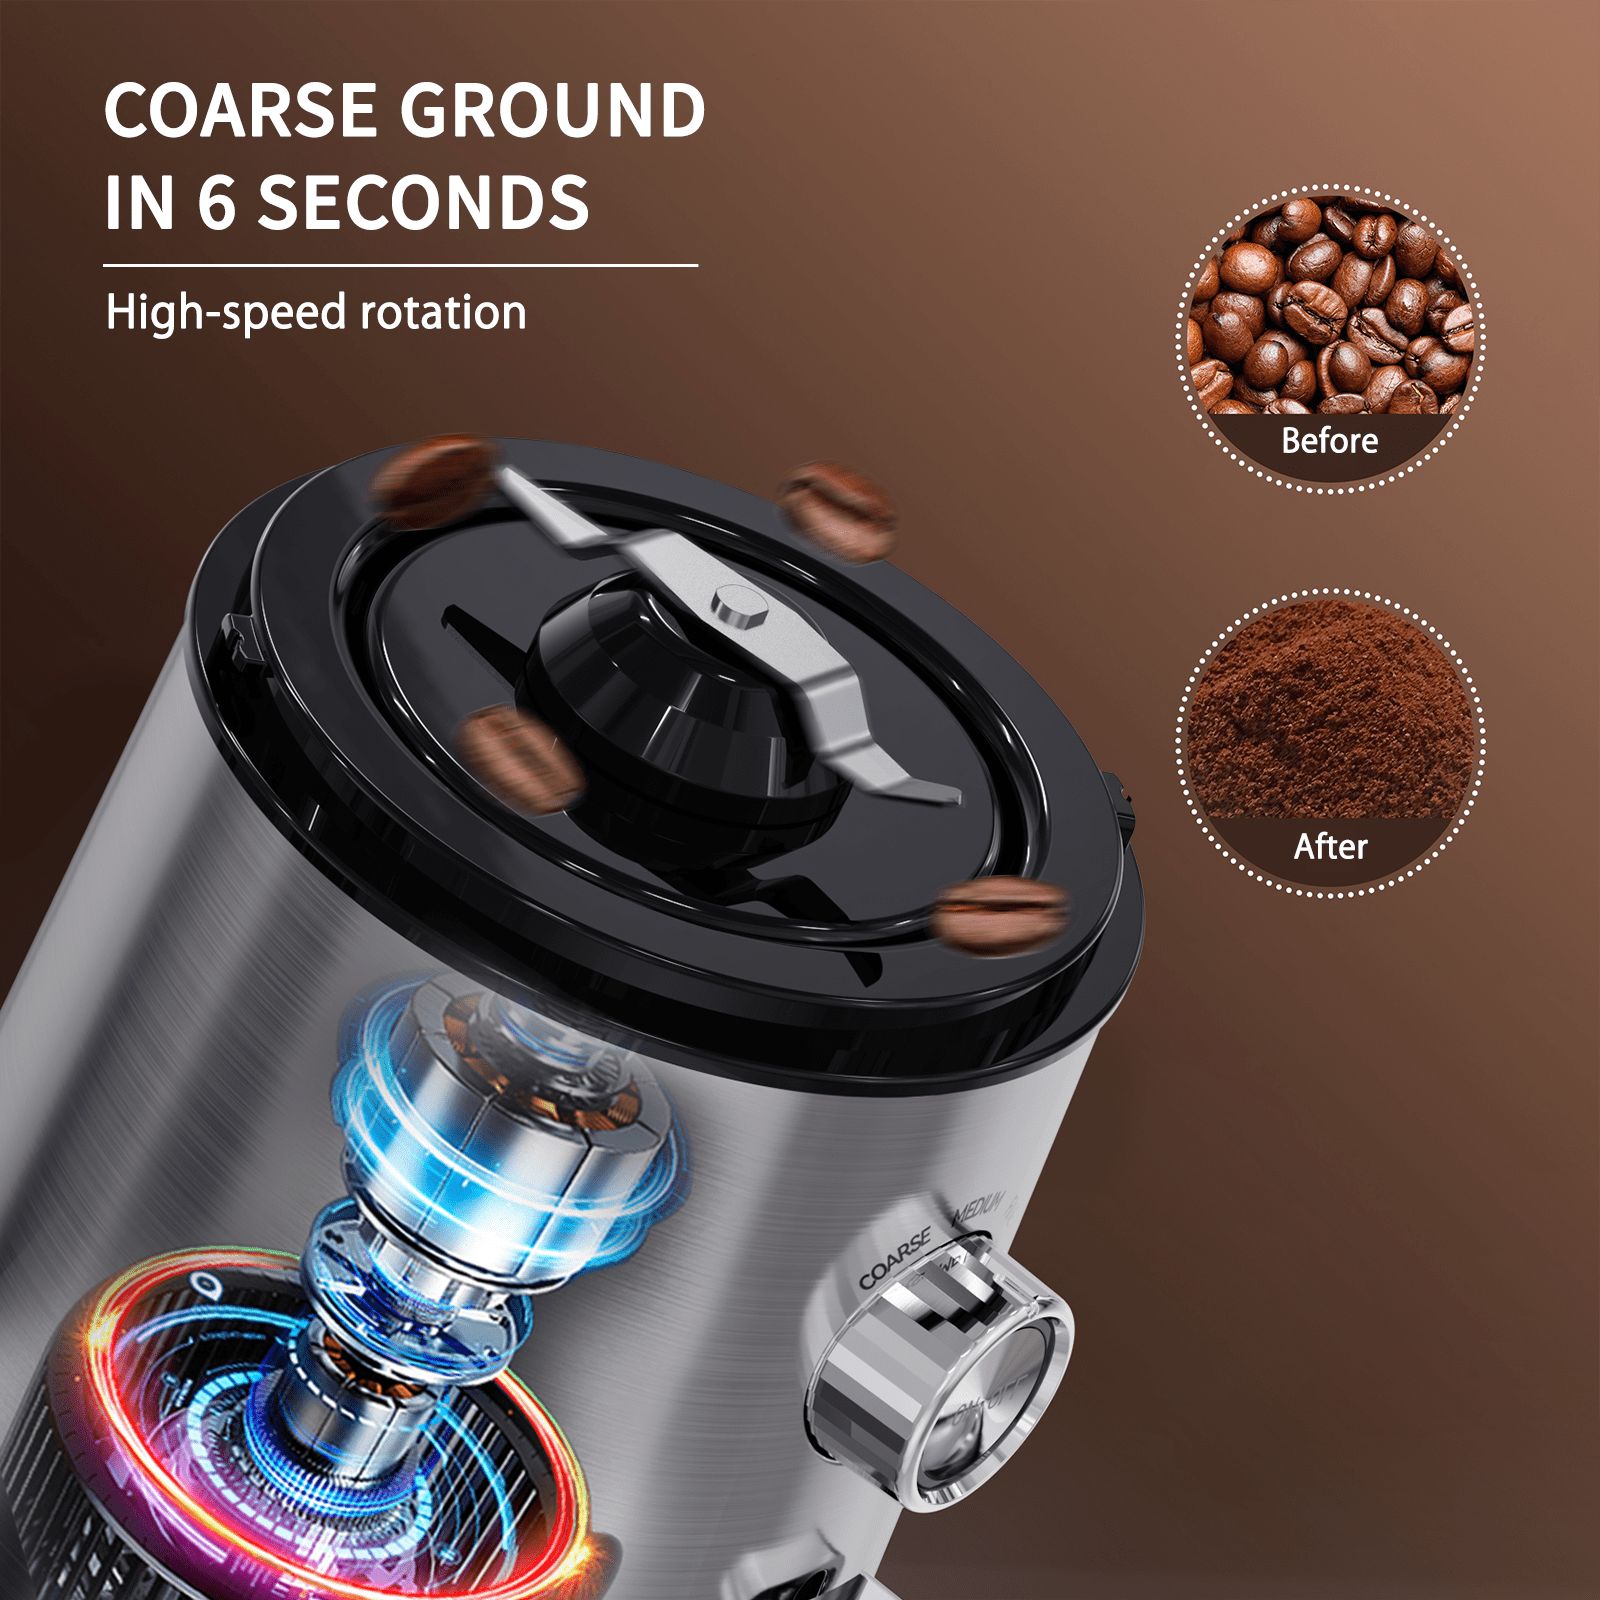 Latady Herb Grinder Spice Grinder Coffee Grinder Electric Spice Grinder  Electric, Grinder for Coffee Bean Spices and Seeds Weed Grinder Large  Capacity/Fast /Electric 